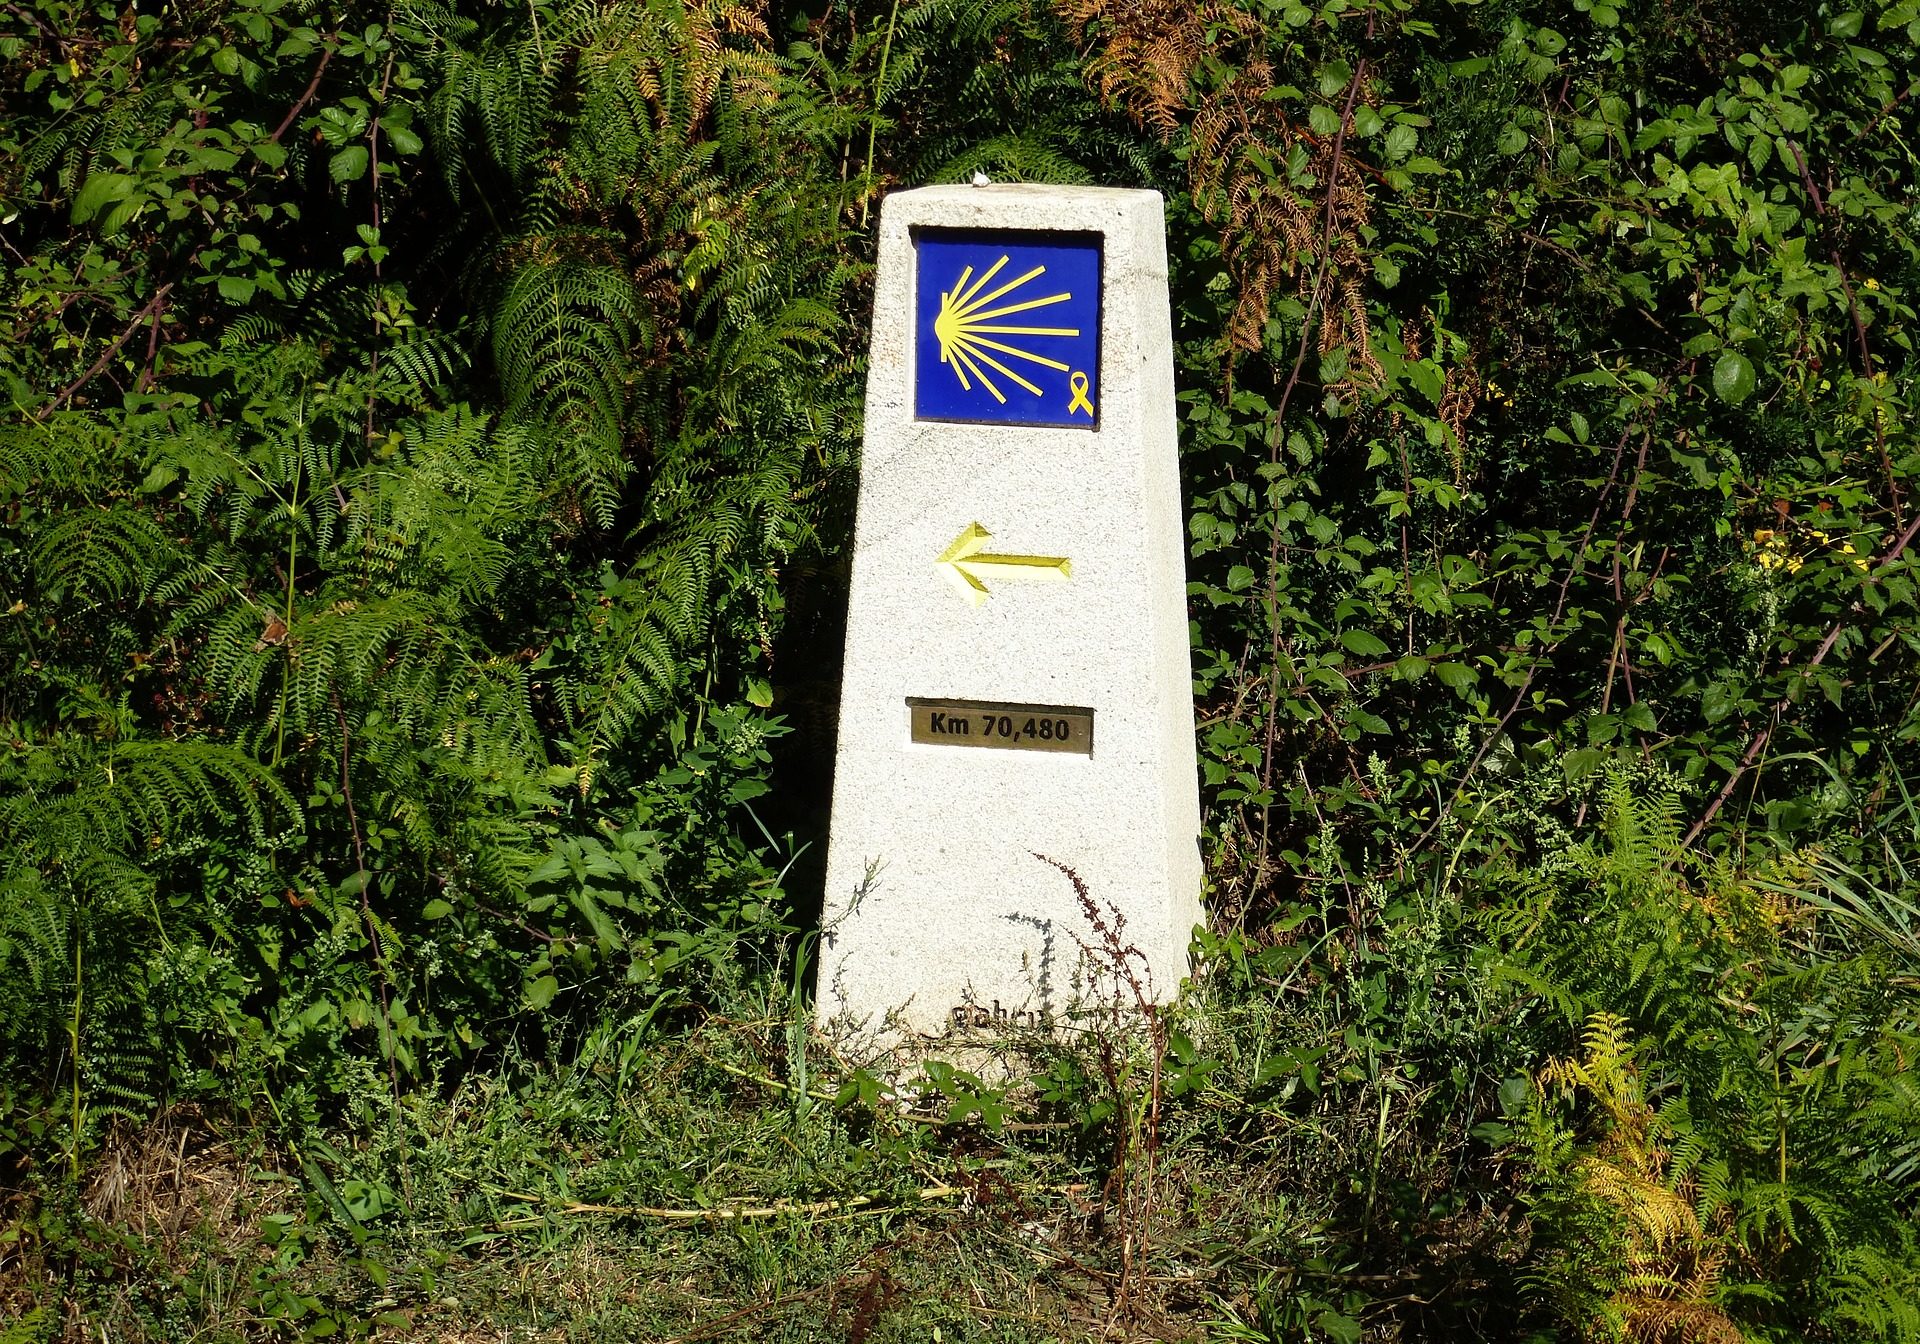 milemarker-way-of-st-james-1757859_1920